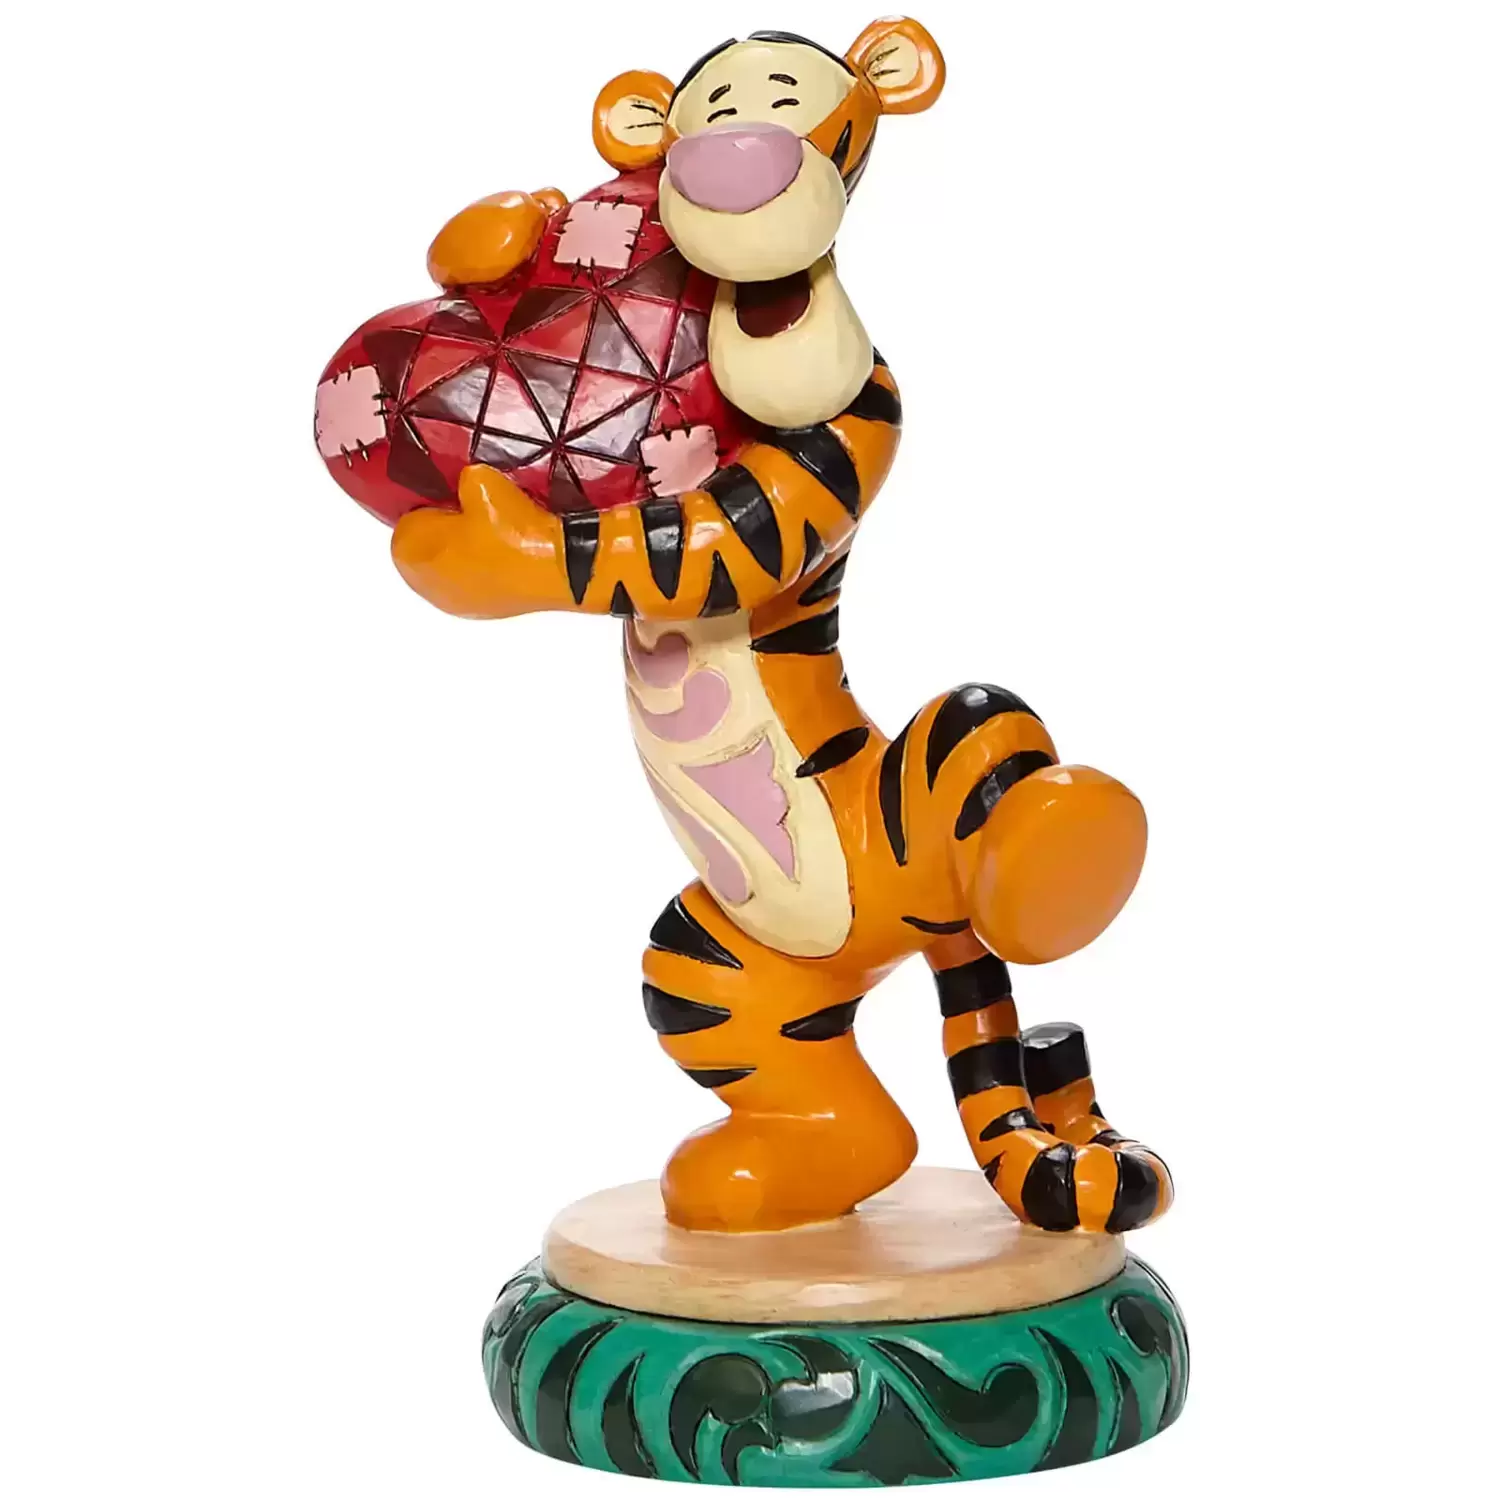 Disney Traditions by Jim Shore - Tigger Holding Heart